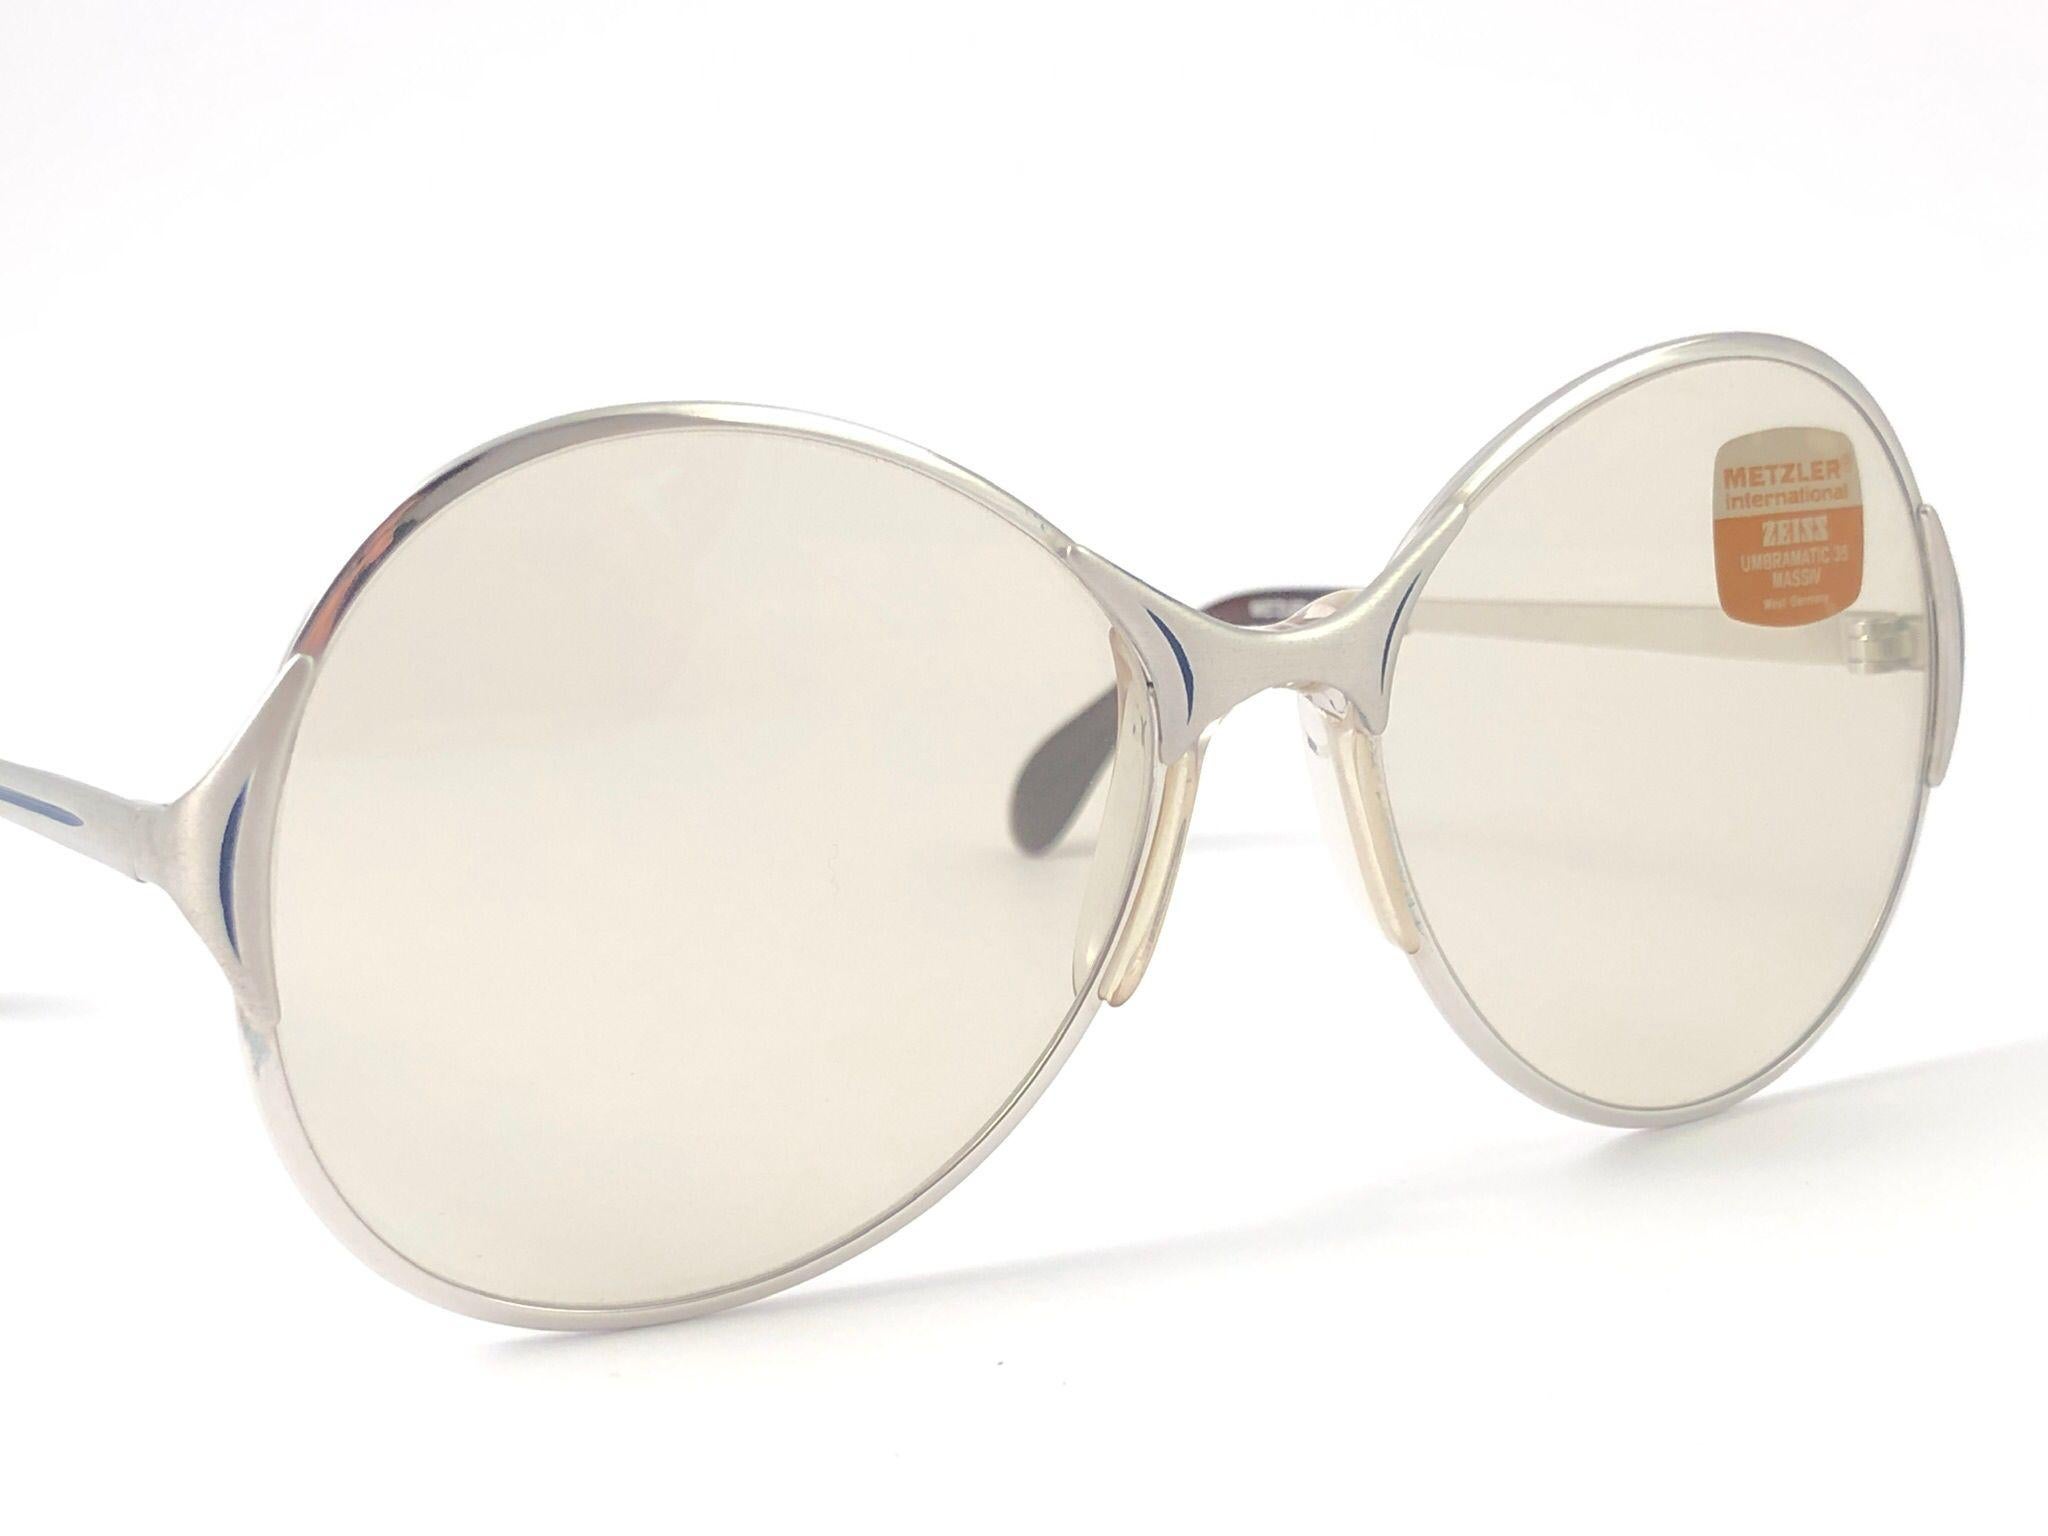 New Vintage Metzler Zeiss Umbramatic Butterfly Sunglasses West Germany 1980's For Sale 5